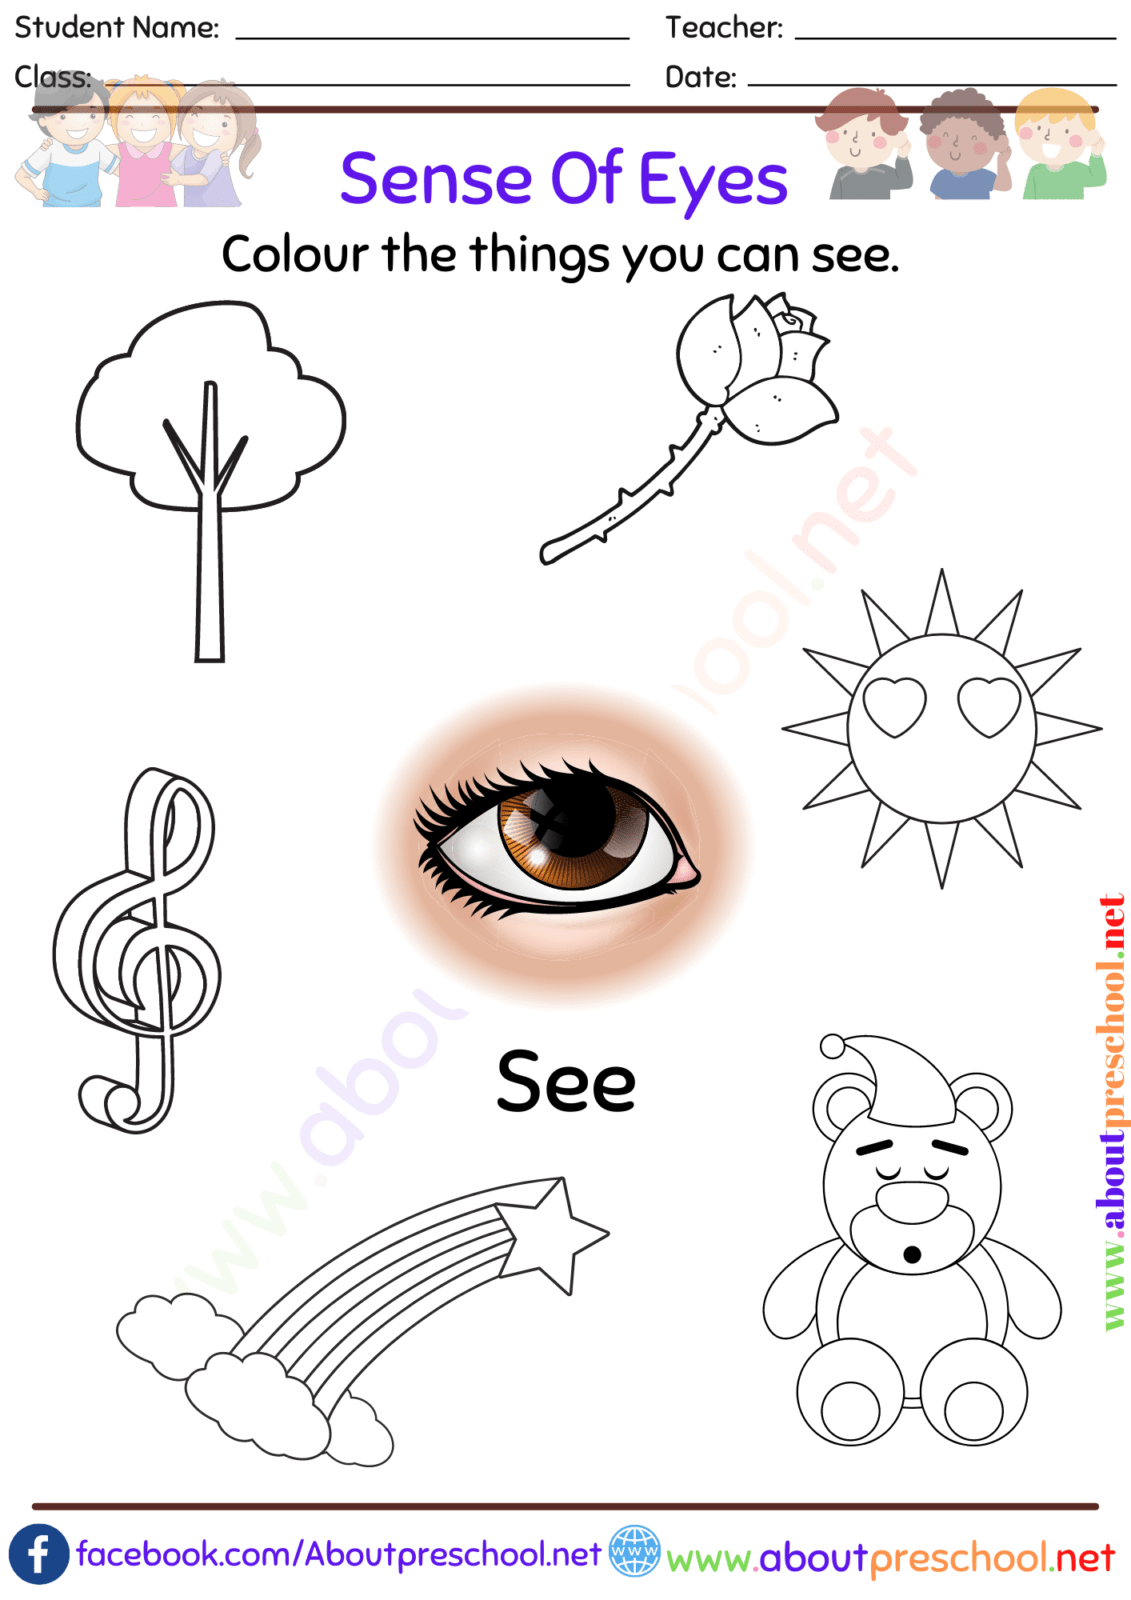 What Are The 5 Senses-See